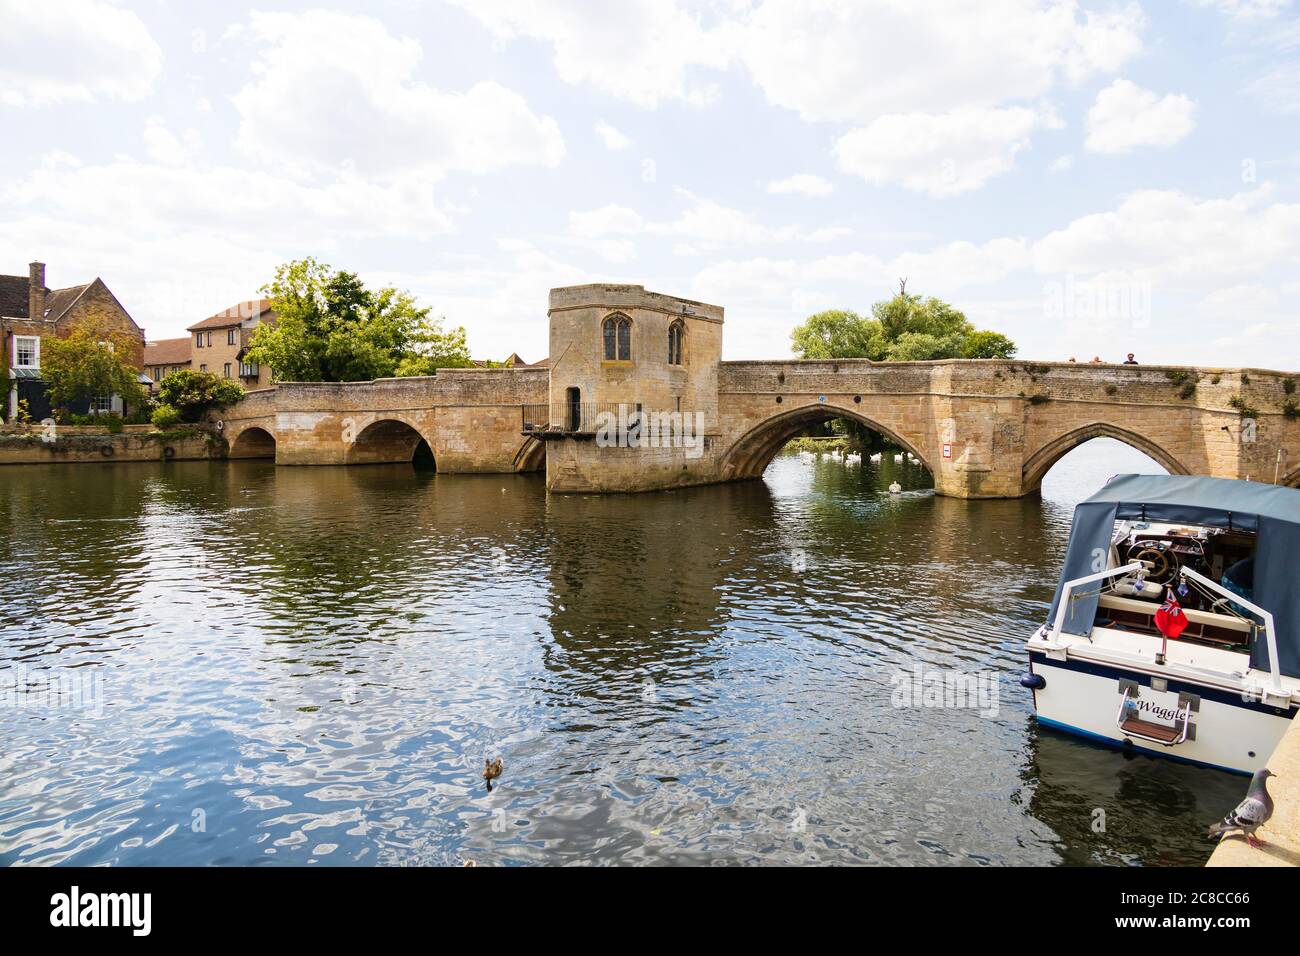 Ponte medievale in pietra di St Ives con cappella sul fiume Great Ouse, St, Ives, Cambridgeshire, Inghilterra Foto Stock